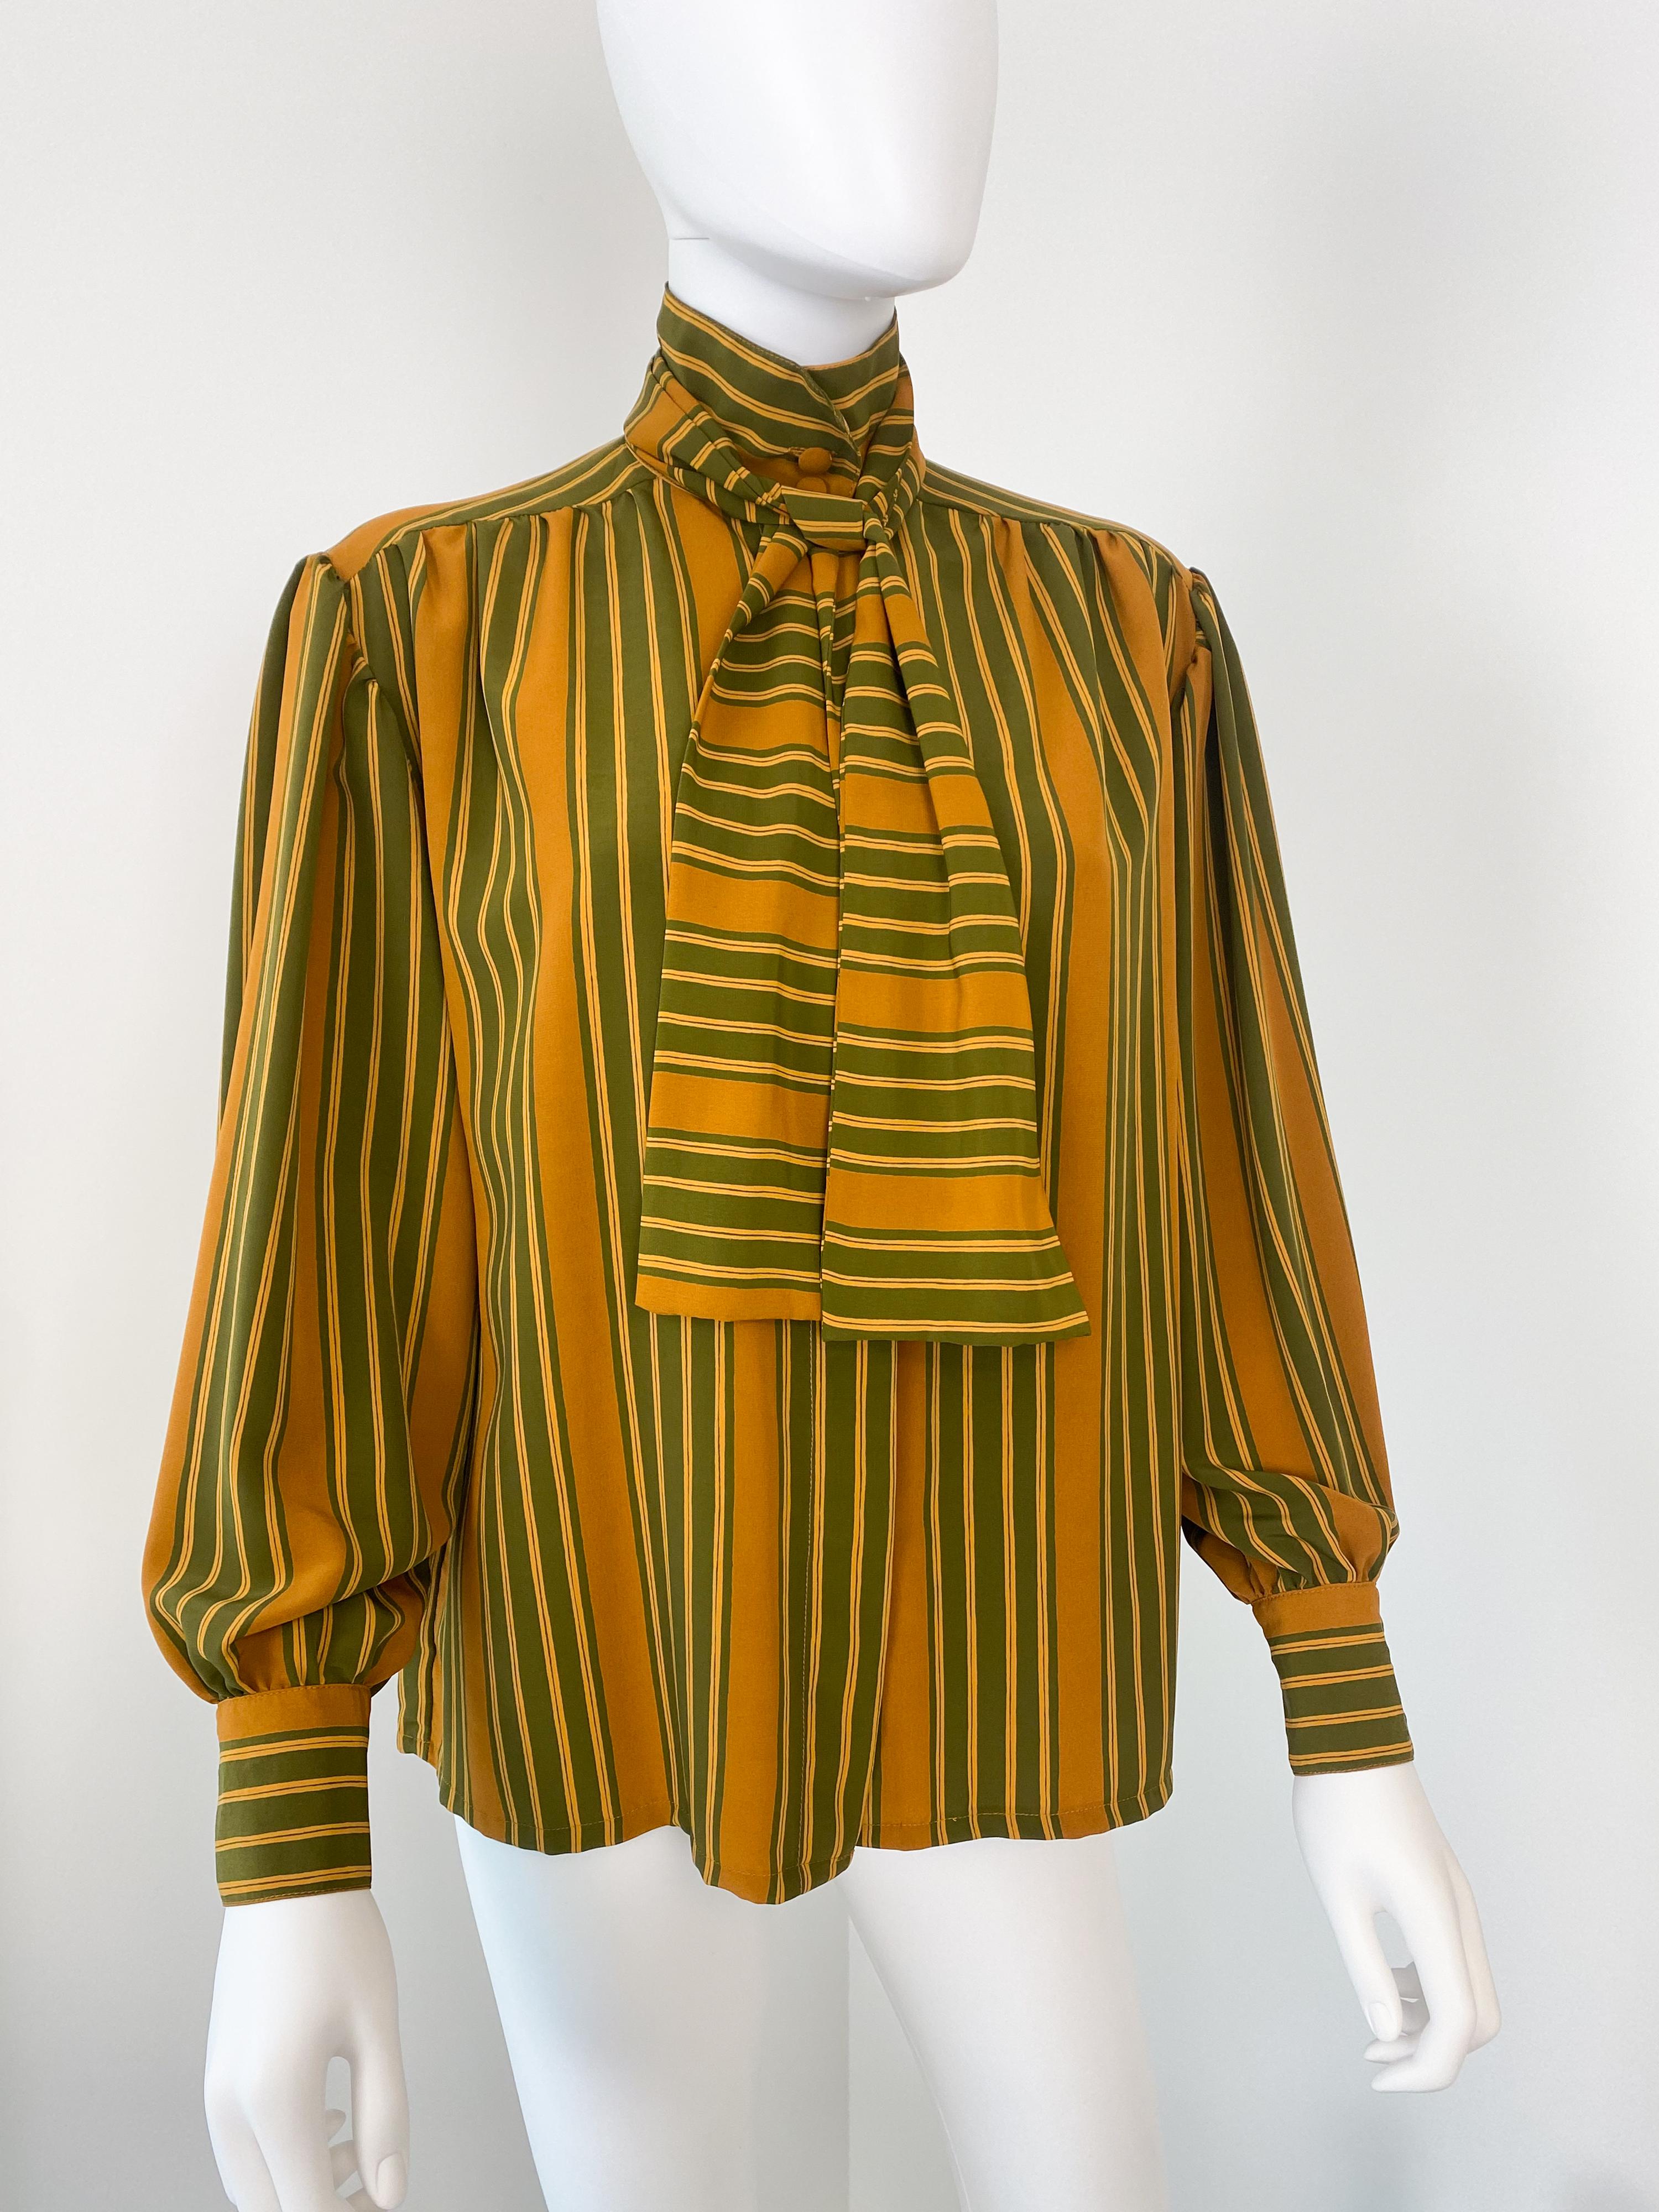 Vintage 1980s Silky Polyester Blouse Top Green and Saffran Stripes Size 10/12 In Excellent Condition For Sale In Atlanta, GA